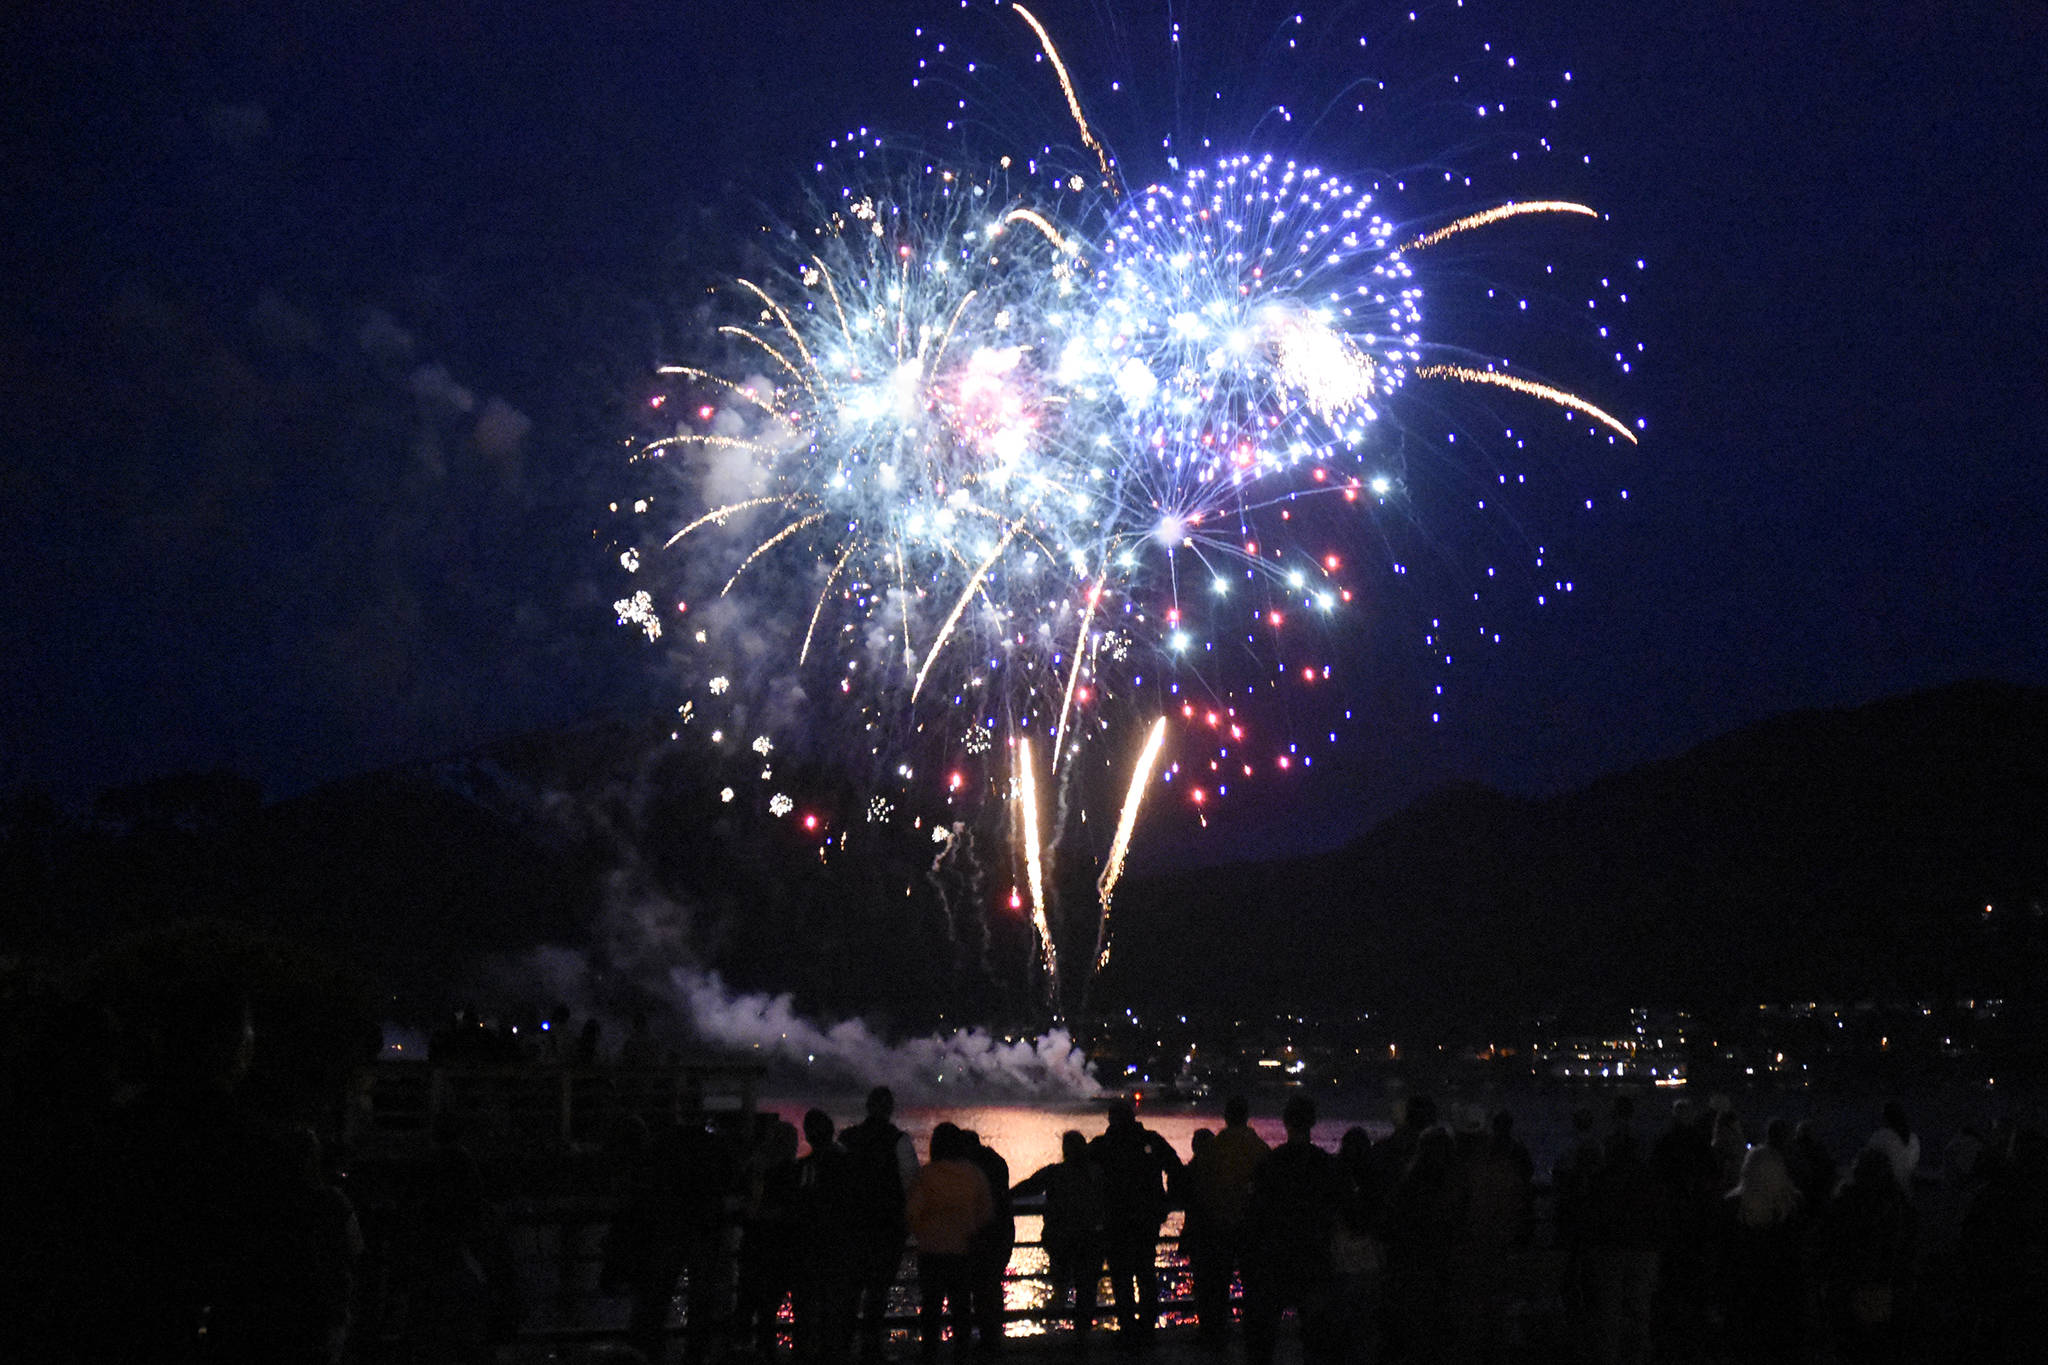 Fireworks light up the night sky over the Gastineau Channel with reds, whites and blues in the early hours of the Fourth of July. Personal fireworks were being shot off nearby, leading one onlooker to shout, “Double fireworks! I love America!” (Peter Segall / Juneau Empire)